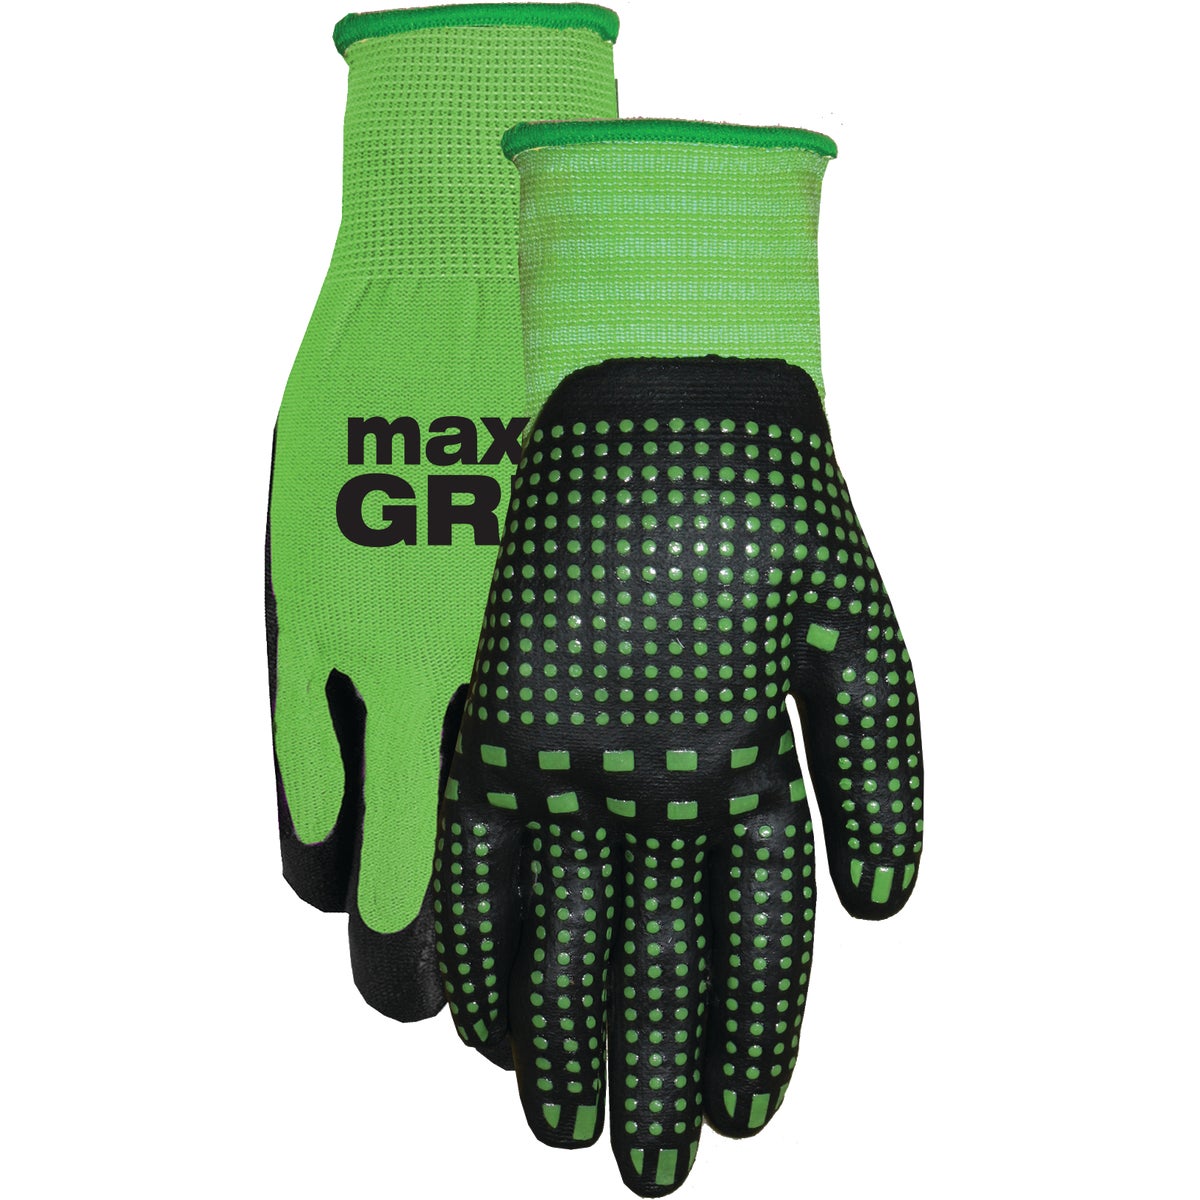 Item 705701, Spandex liner glove dipped in foam nitrile with added nitrile dots.